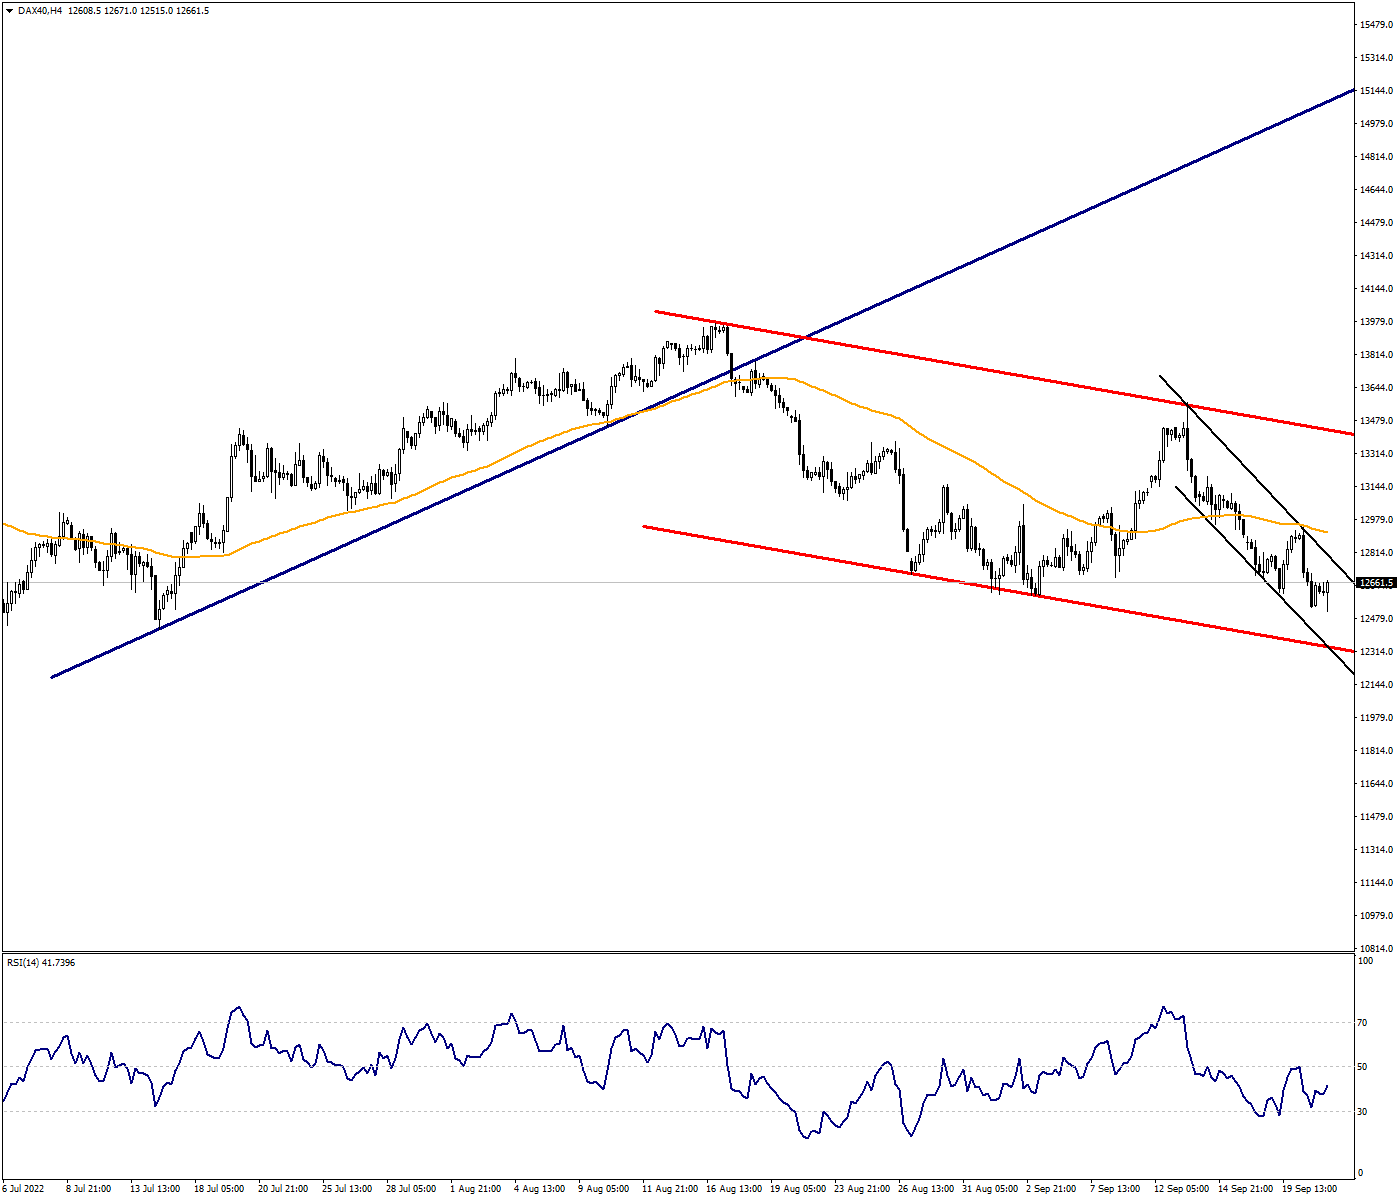 DAX40 Continues to Defend Descending Channel